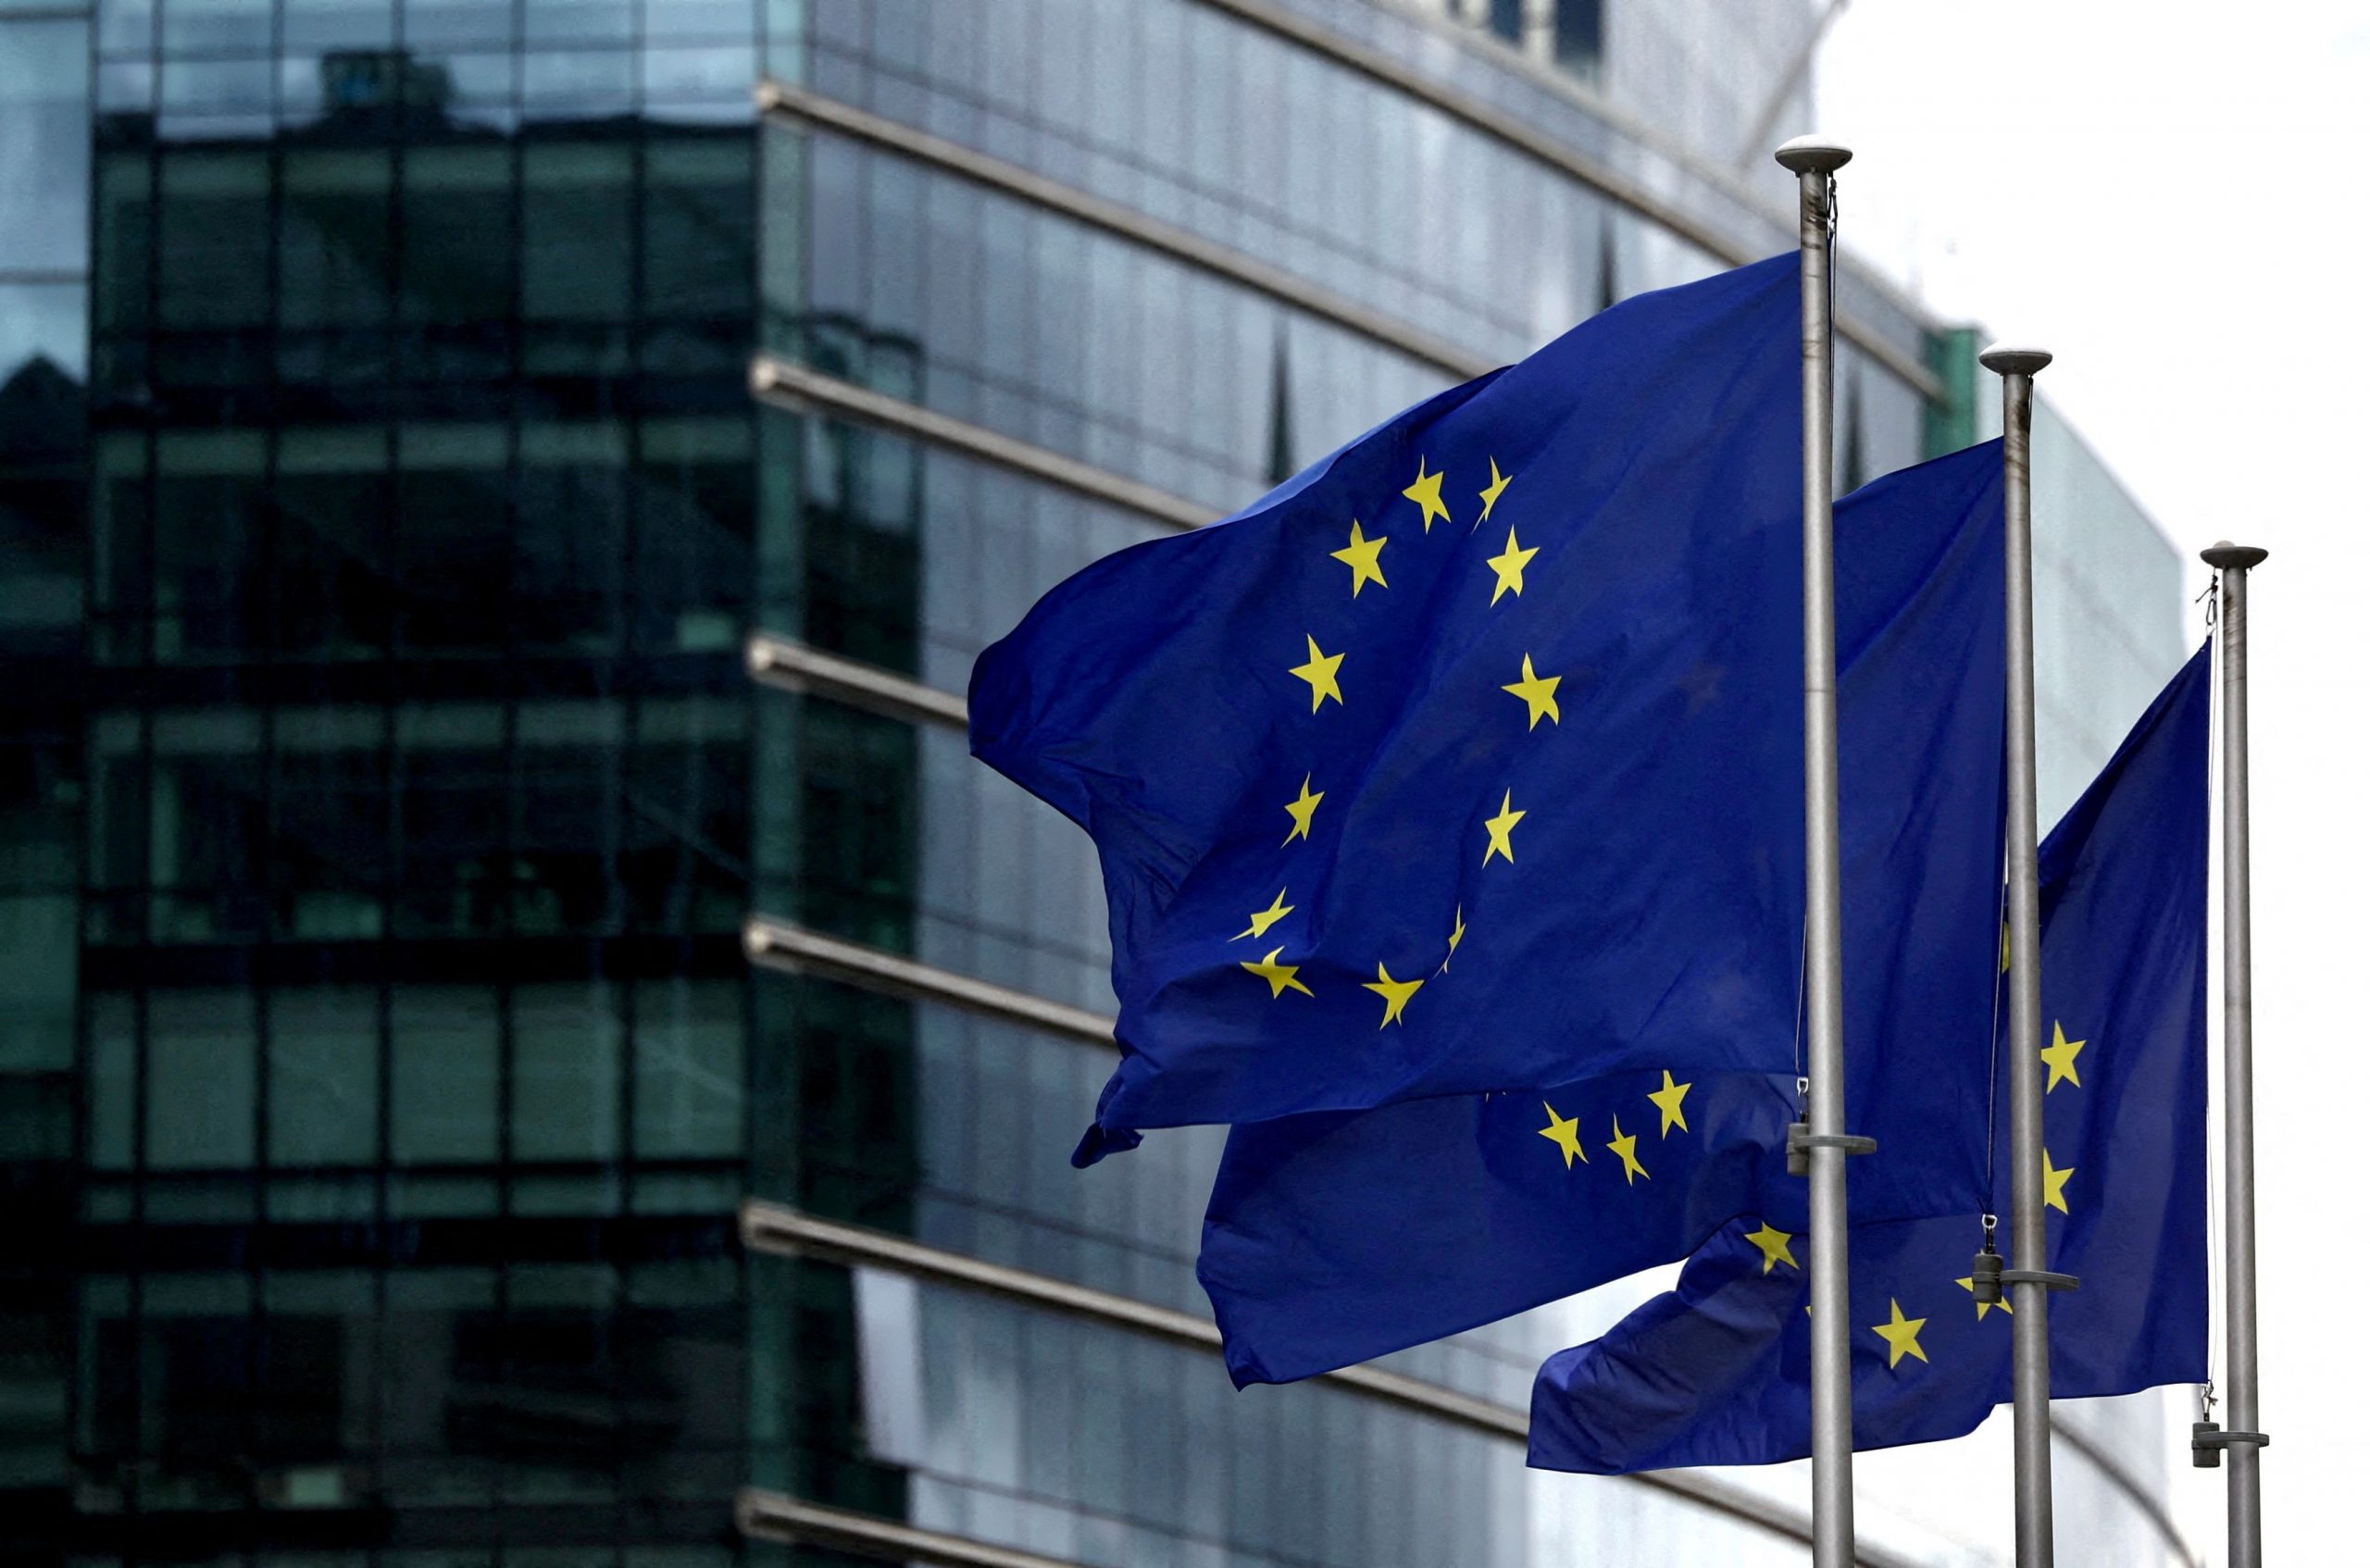 EU Commission Refers Greece to Court for Failing to Apply EU Rules on Late Payments Correctly